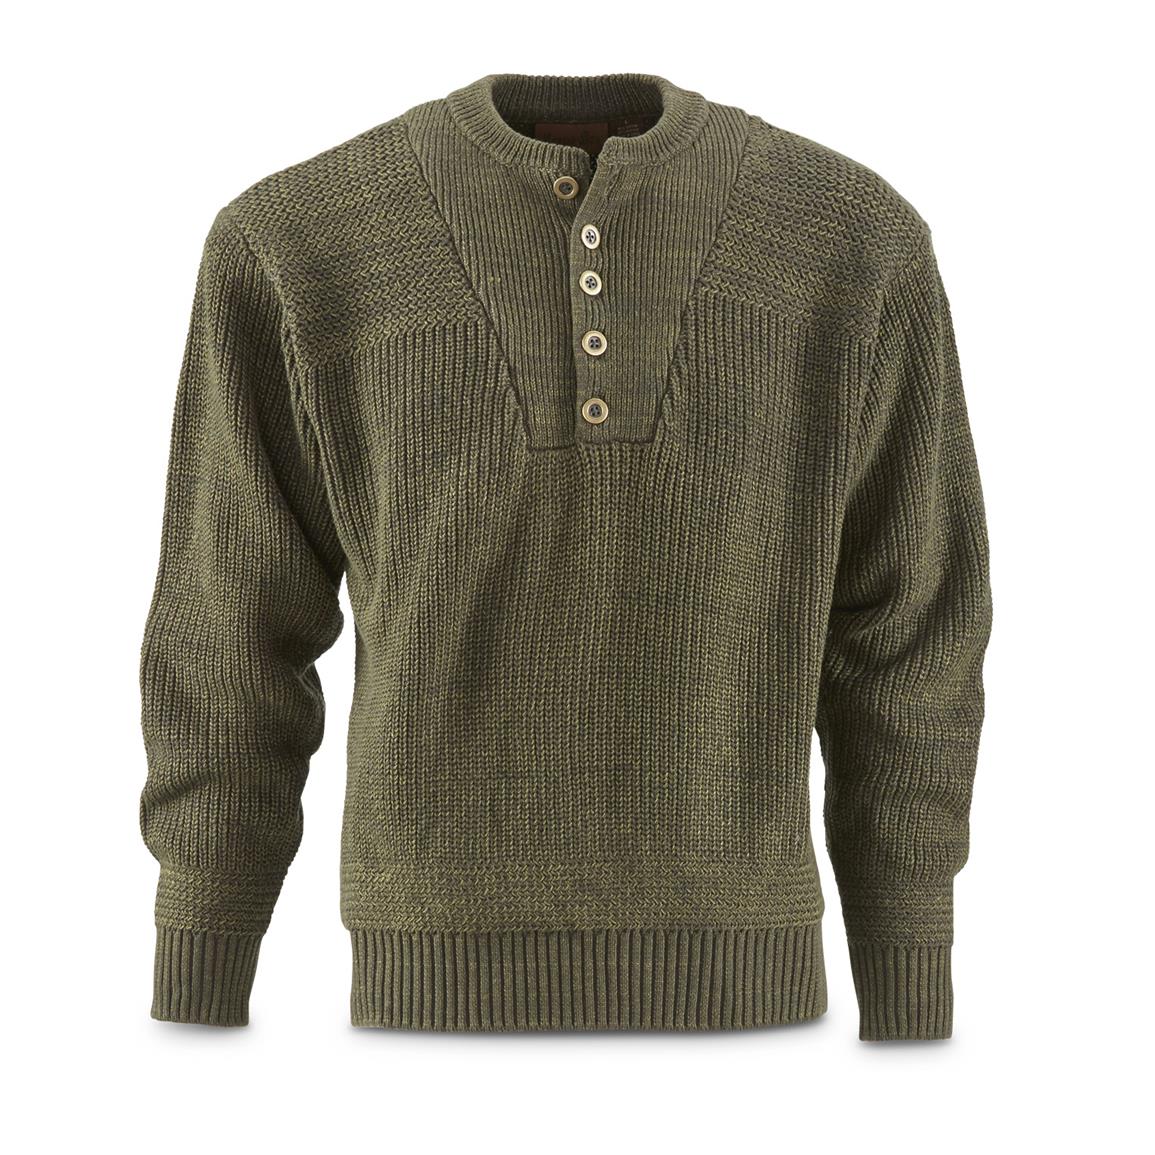 Marion Bay Men's Fatigue Pullover Sweater - 664983, Sweaters at ...